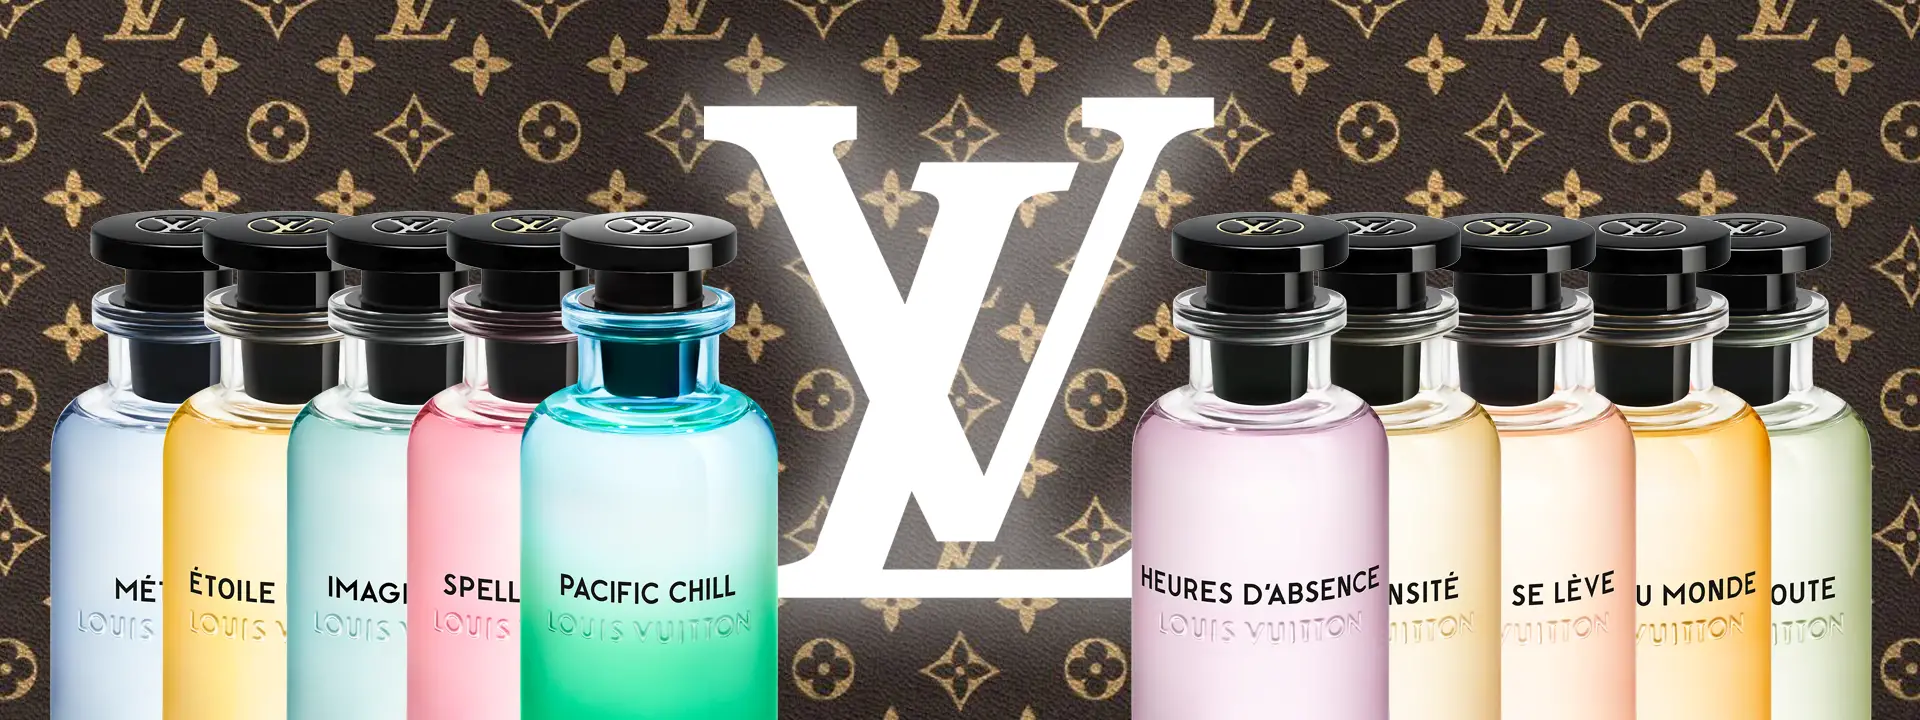 A Guide To The Louis Vuitton Fragrance Collection